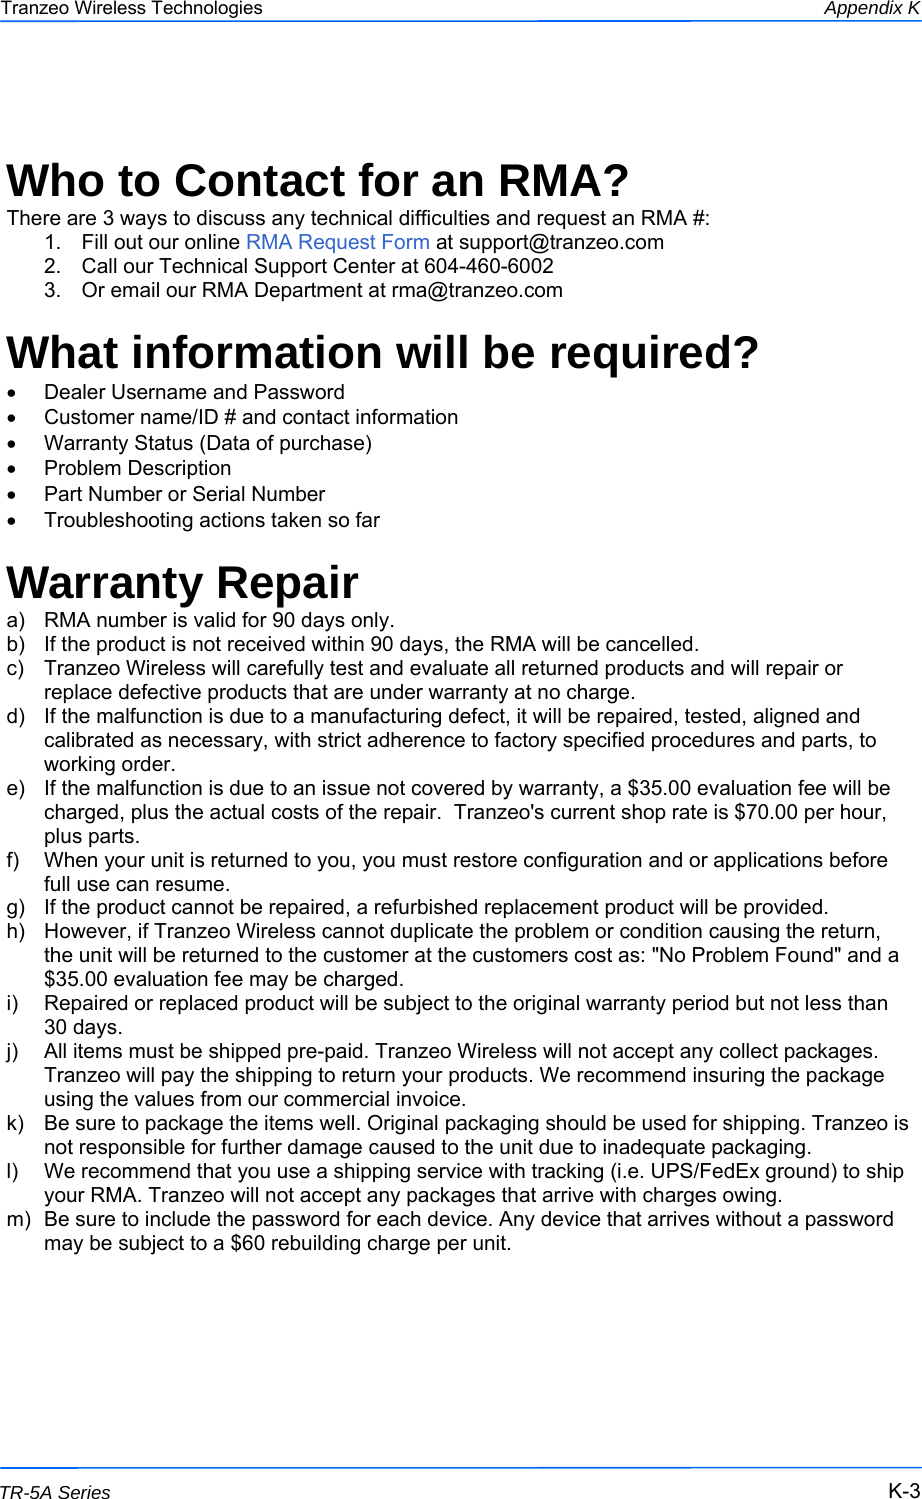  333 This document is intended for Public Distribution                         19473 Fraser Way, Pitt Meadows, B.C. Canada V3Y  2V4 Appendix K K-3 TR-5A Series Tranzeo Wireless Technologies  Who to Contact for an RMA? There are 3 ways to discuss any technical difficulties and request an RMA #:  1.  Fill out our online RMA Request Form at support@tranzeo.com  2.  Call our Technical Support Center at 604-460-6002 3.  Or email our RMA Department at rma@tranzeo.com  What information will be required? •  Dealer Username and Password •  Customer name/ID # and contact information •  Warranty Status (Data of purchase) •  Problem Description •  Part Number or Serial Number •  Troubleshooting actions taken so far  Warranty Repair a)  RMA number is valid for 90 days only. b)  If the product is not received within 90 days, the RMA will be cancelled. c)  Tranzeo Wireless will carefully test and evaluate all returned products and will repair or replace defective products that are under warranty at no charge. d)  If the malfunction is due to a manufacturing defect, it will be repaired, tested, aligned and calibrated as necessary, with strict adherence to factory specified procedures and parts, to working order. e)  If the malfunction is due to an issue not covered by warranty, a $35.00 evaluation fee will be charged, plus the actual costs of the repair.  Tranzeo&apos;s current shop rate is $70.00 per hour, plus parts. f)  When your unit is returned to you, you must restore configuration and or applications before full use can resume. g)  If the product cannot be repaired, a refurbished replacement product will be provided. h)  However, if Tranzeo Wireless cannot duplicate the problem or condition causing the return, the unit will be returned to the customer at the customers cost as: &quot;No Problem Found&quot; and a $35.00 evaluation fee may be charged. i)  Repaired or replaced product will be subject to the original warranty period but not less than 30 days. j)  All items must be shipped pre-paid. Tranzeo Wireless will not accept any collect packages. Tranzeo will pay the shipping to return your products. We recommend insuring the package using the values from our commercial invoice. k)  Be sure to package the items well. Original packaging should be used for shipping. Tranzeo is not responsible for further damage caused to the unit due to inadequate packaging. l)  We recommend that you use a shipping service with tracking (i.e. UPS/FedEx ground) to ship your RMA. Tranzeo will not accept any packages that arrive with charges owing. m)  Be sure to include the password for each device. Any device that arrives without a password may be subject to a $60 rebuilding charge per unit.    